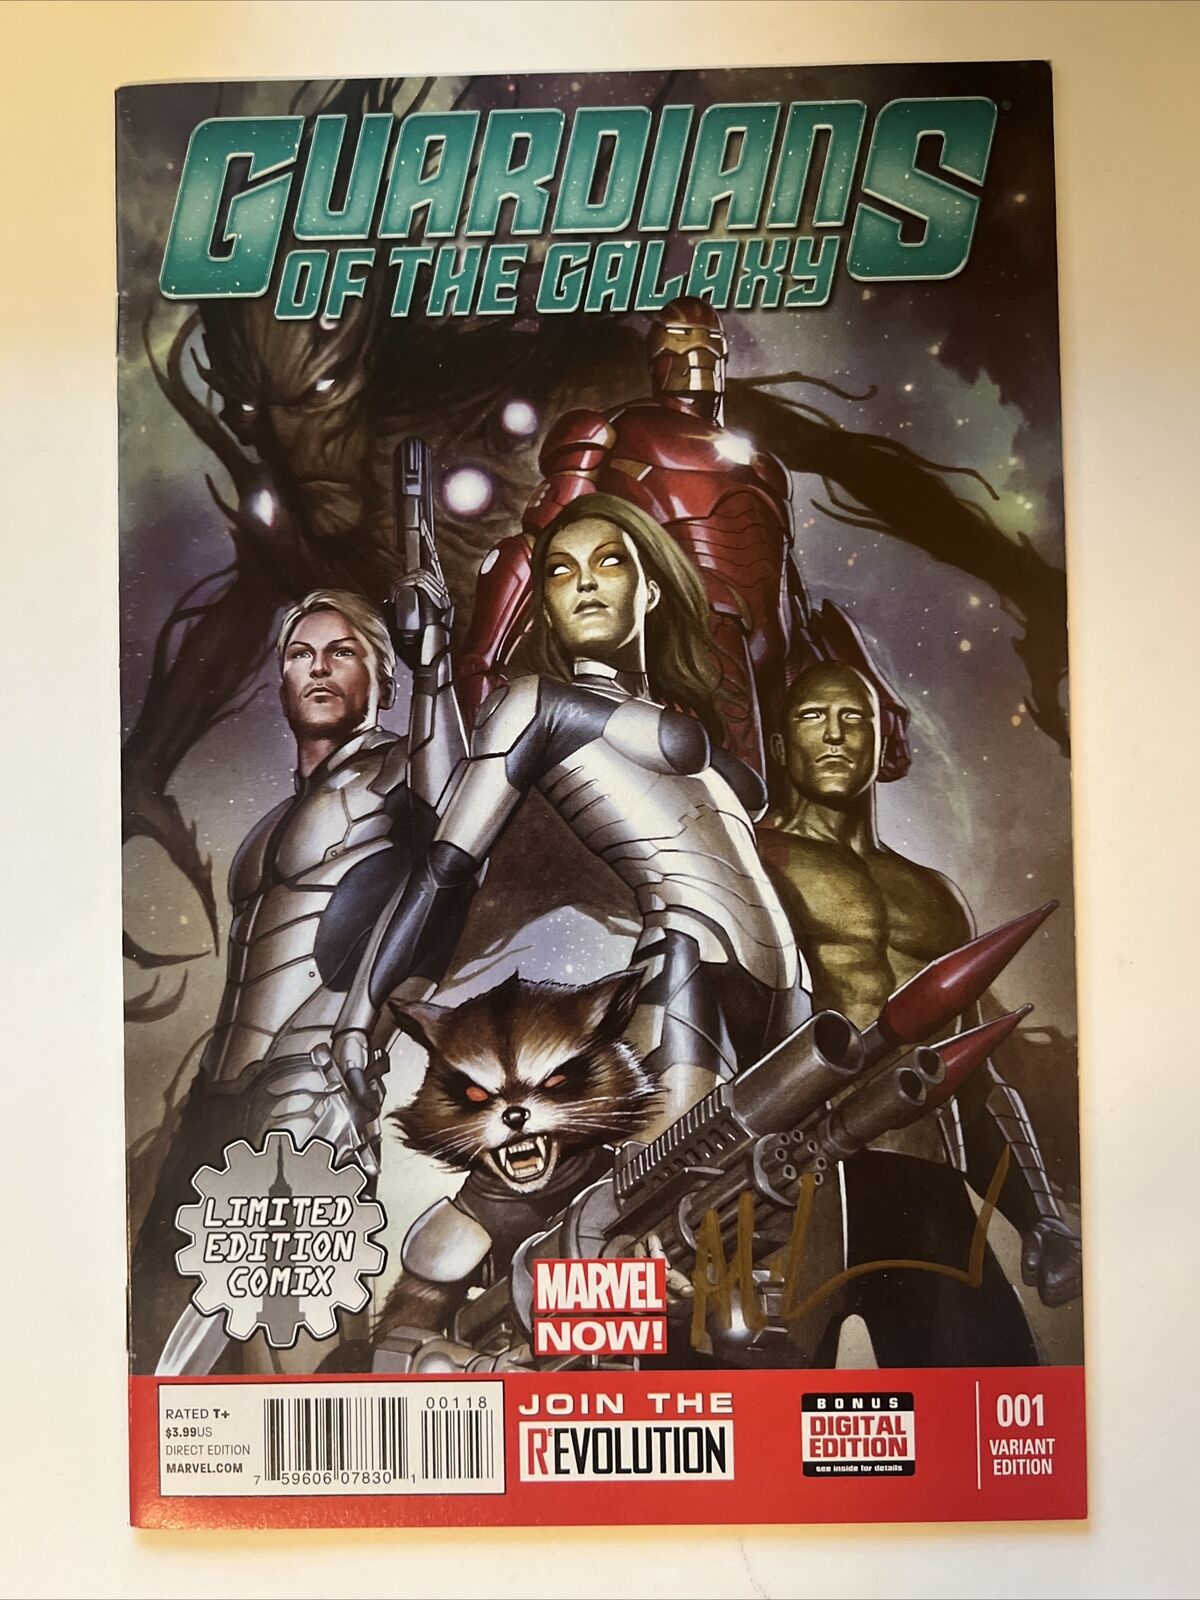 GUARDIANS OF THE GALAXY 1 SIGNED BY ADI GRANOV LIMITED EDITION COMIX VARIANT COA